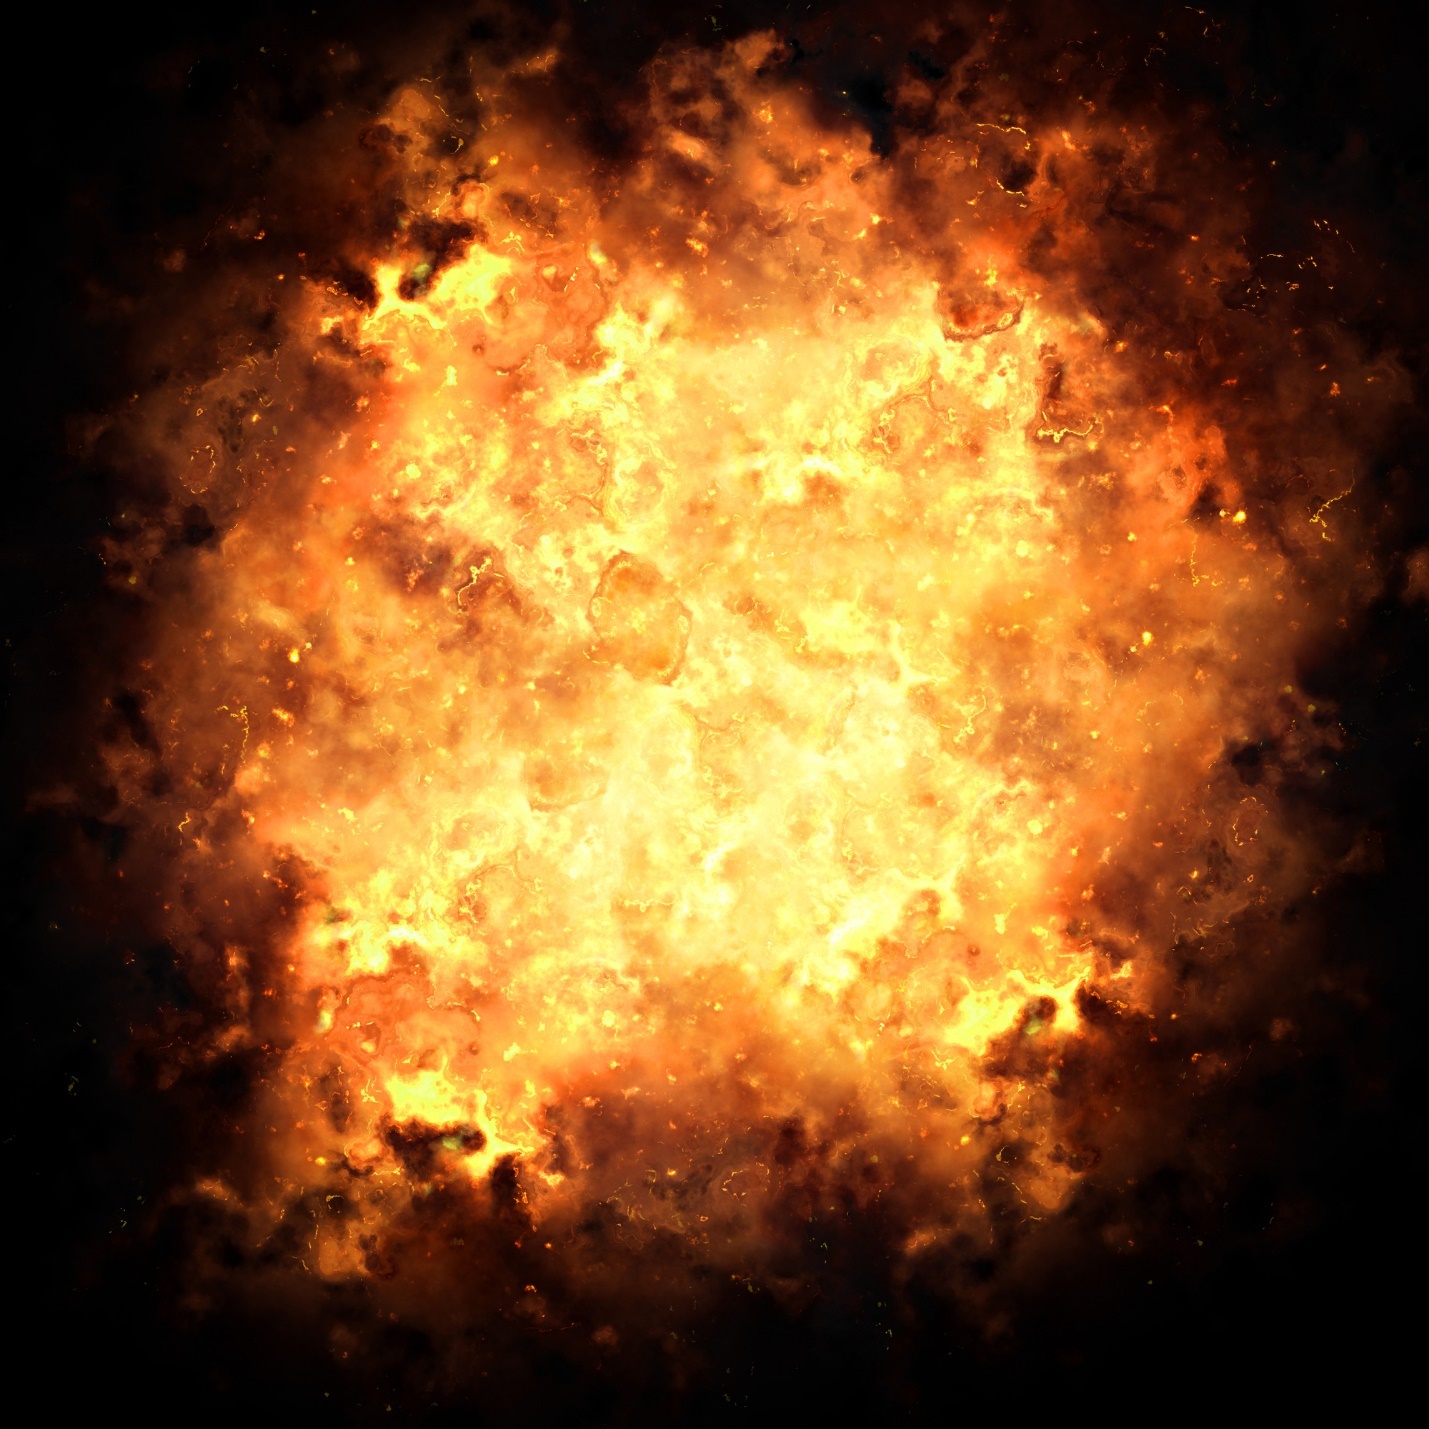 A fireball with smoke and sparks

Description automatically generated with medium confidence